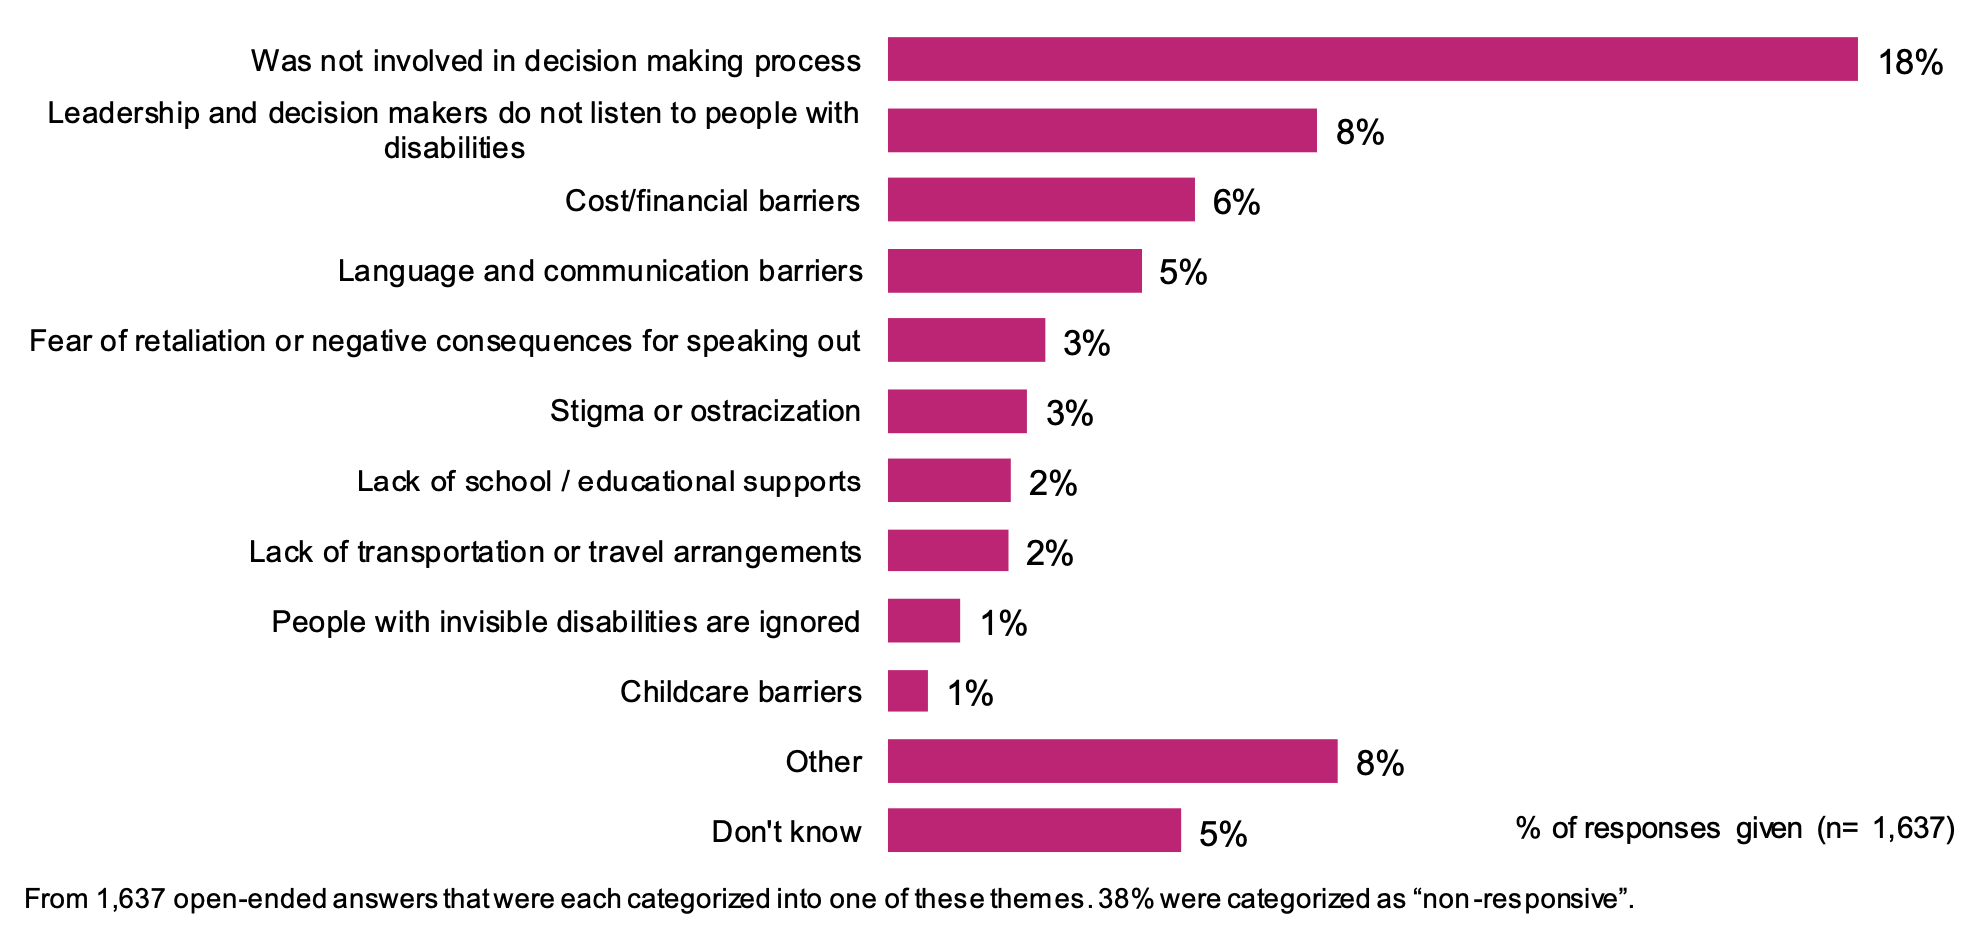 This is a bar chart of the most common examples of obstacles that prevent people from participating in decision-making.